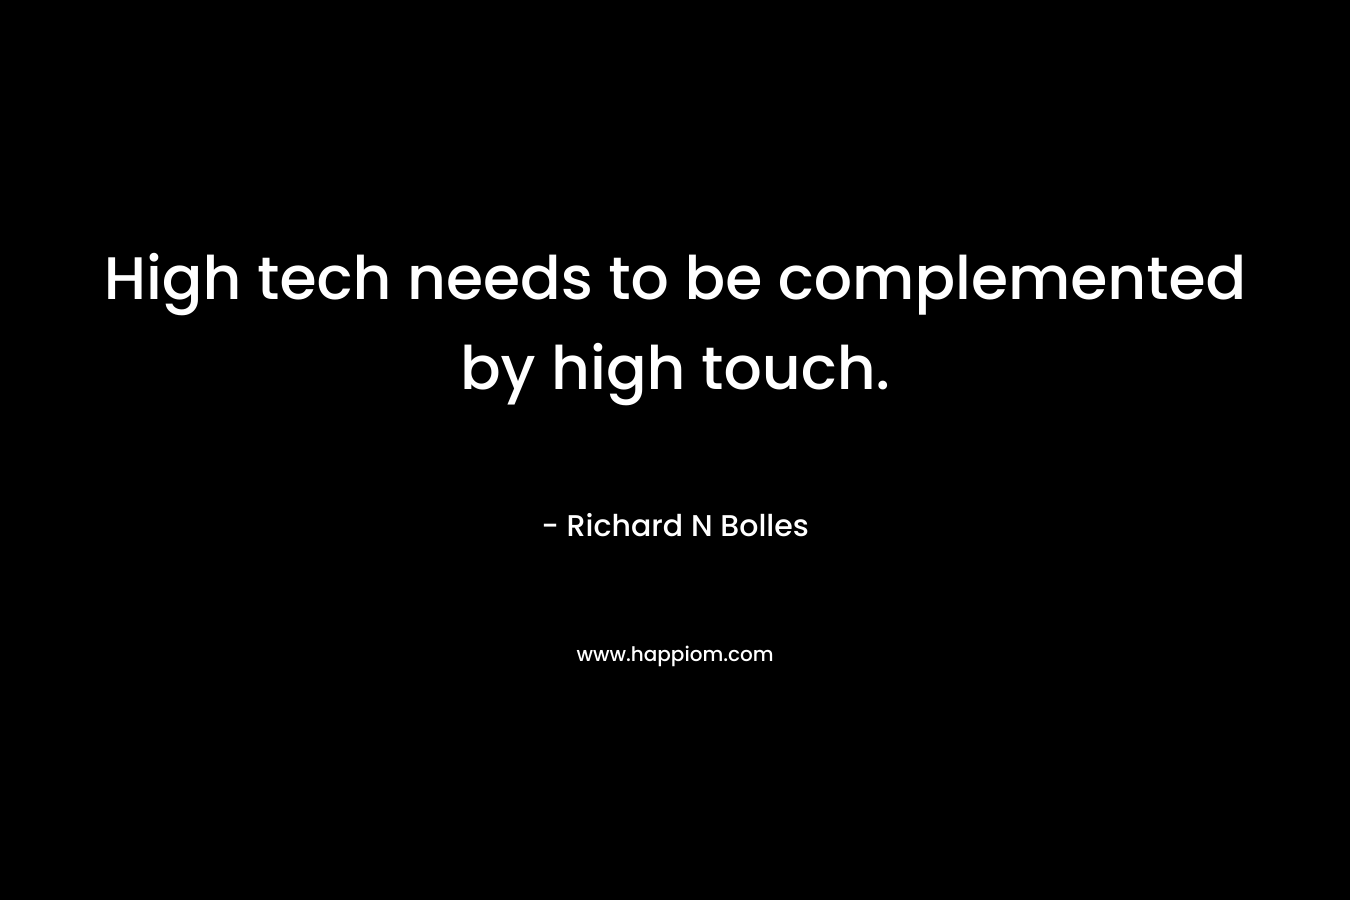 High tech needs to be complemented by high touch.